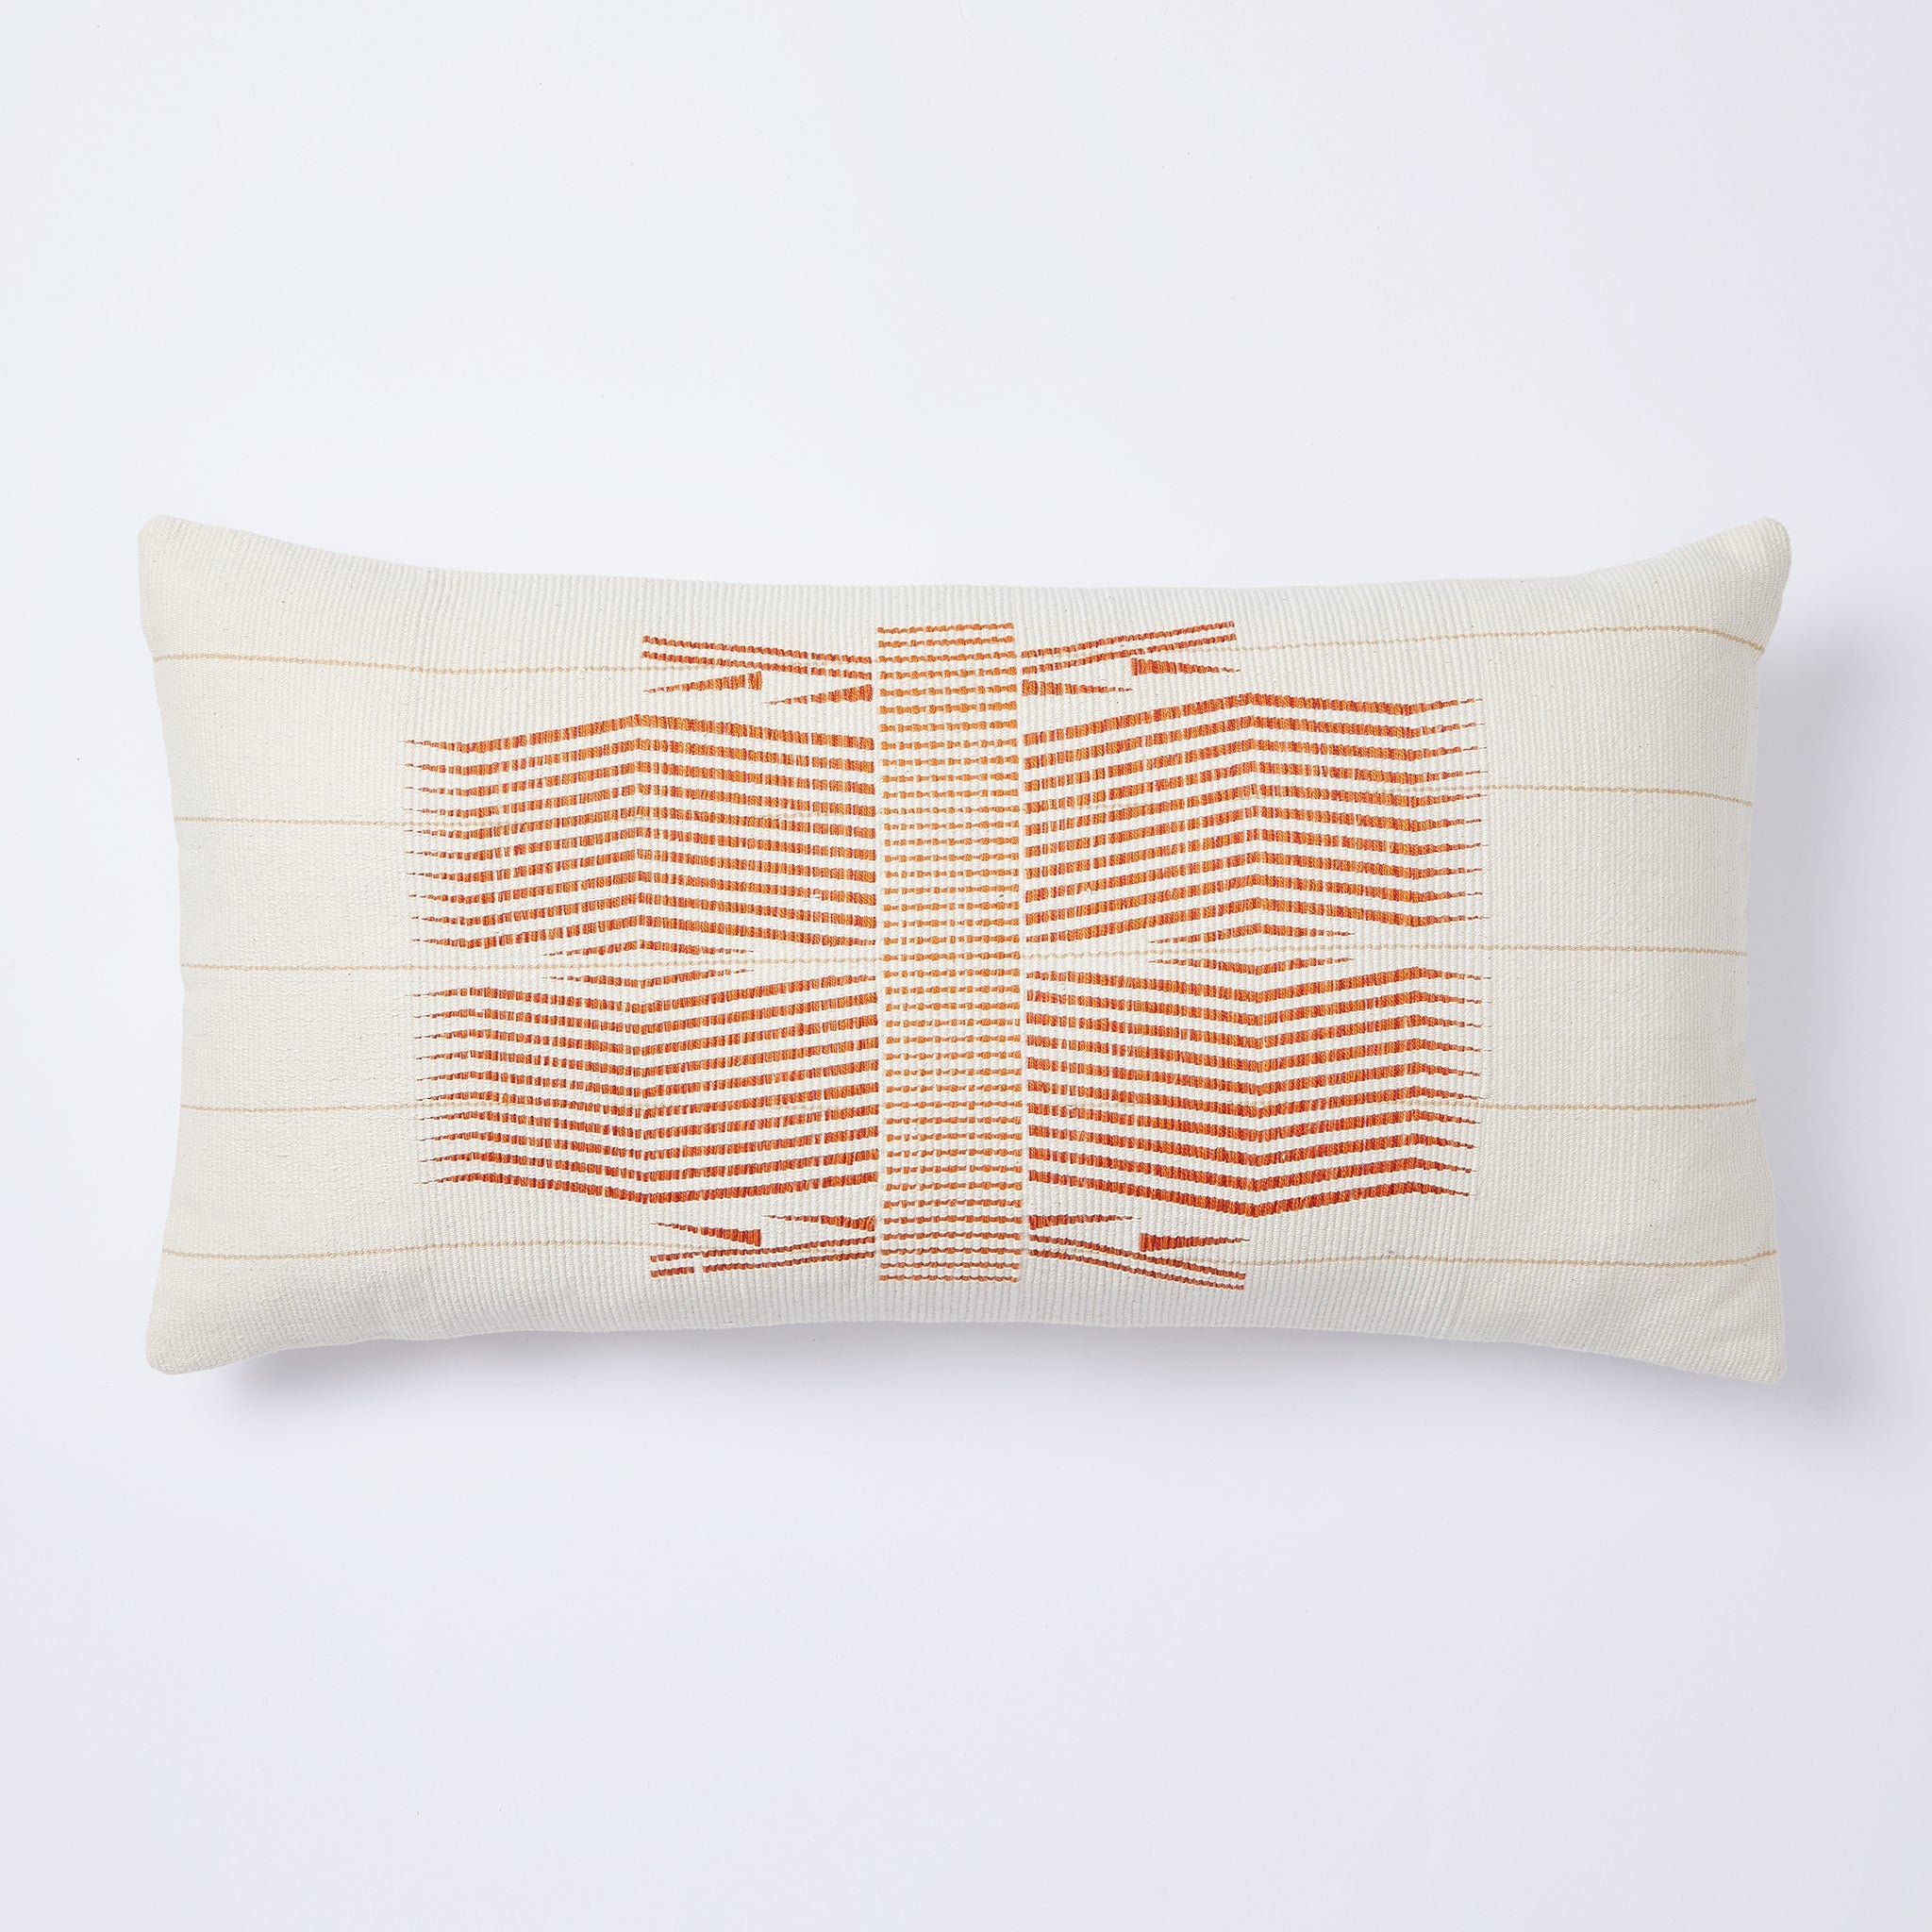 Pillow Milka from Nagaland. Handwoven from soft cotton by master weavers in India in a Fairtrade environment.